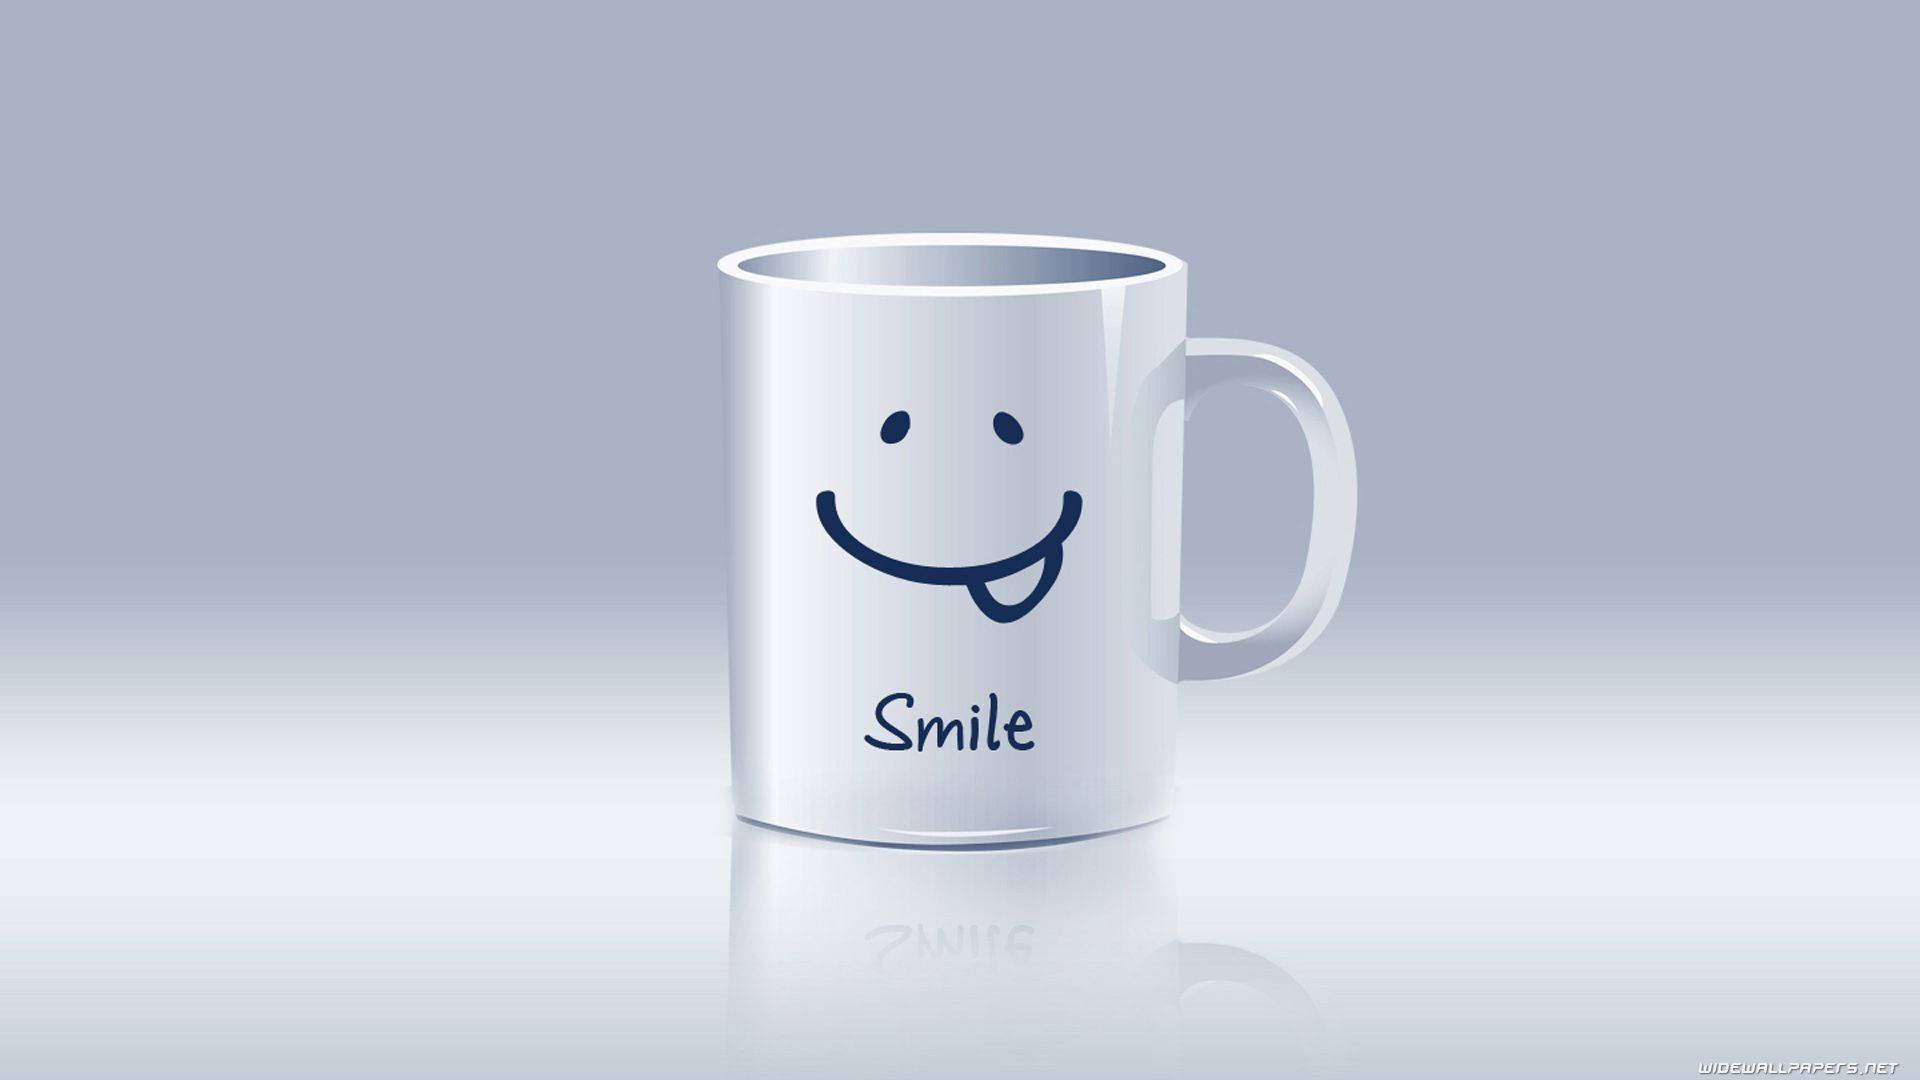 Can't help but smile with a warm mug of coffee Wallpaper